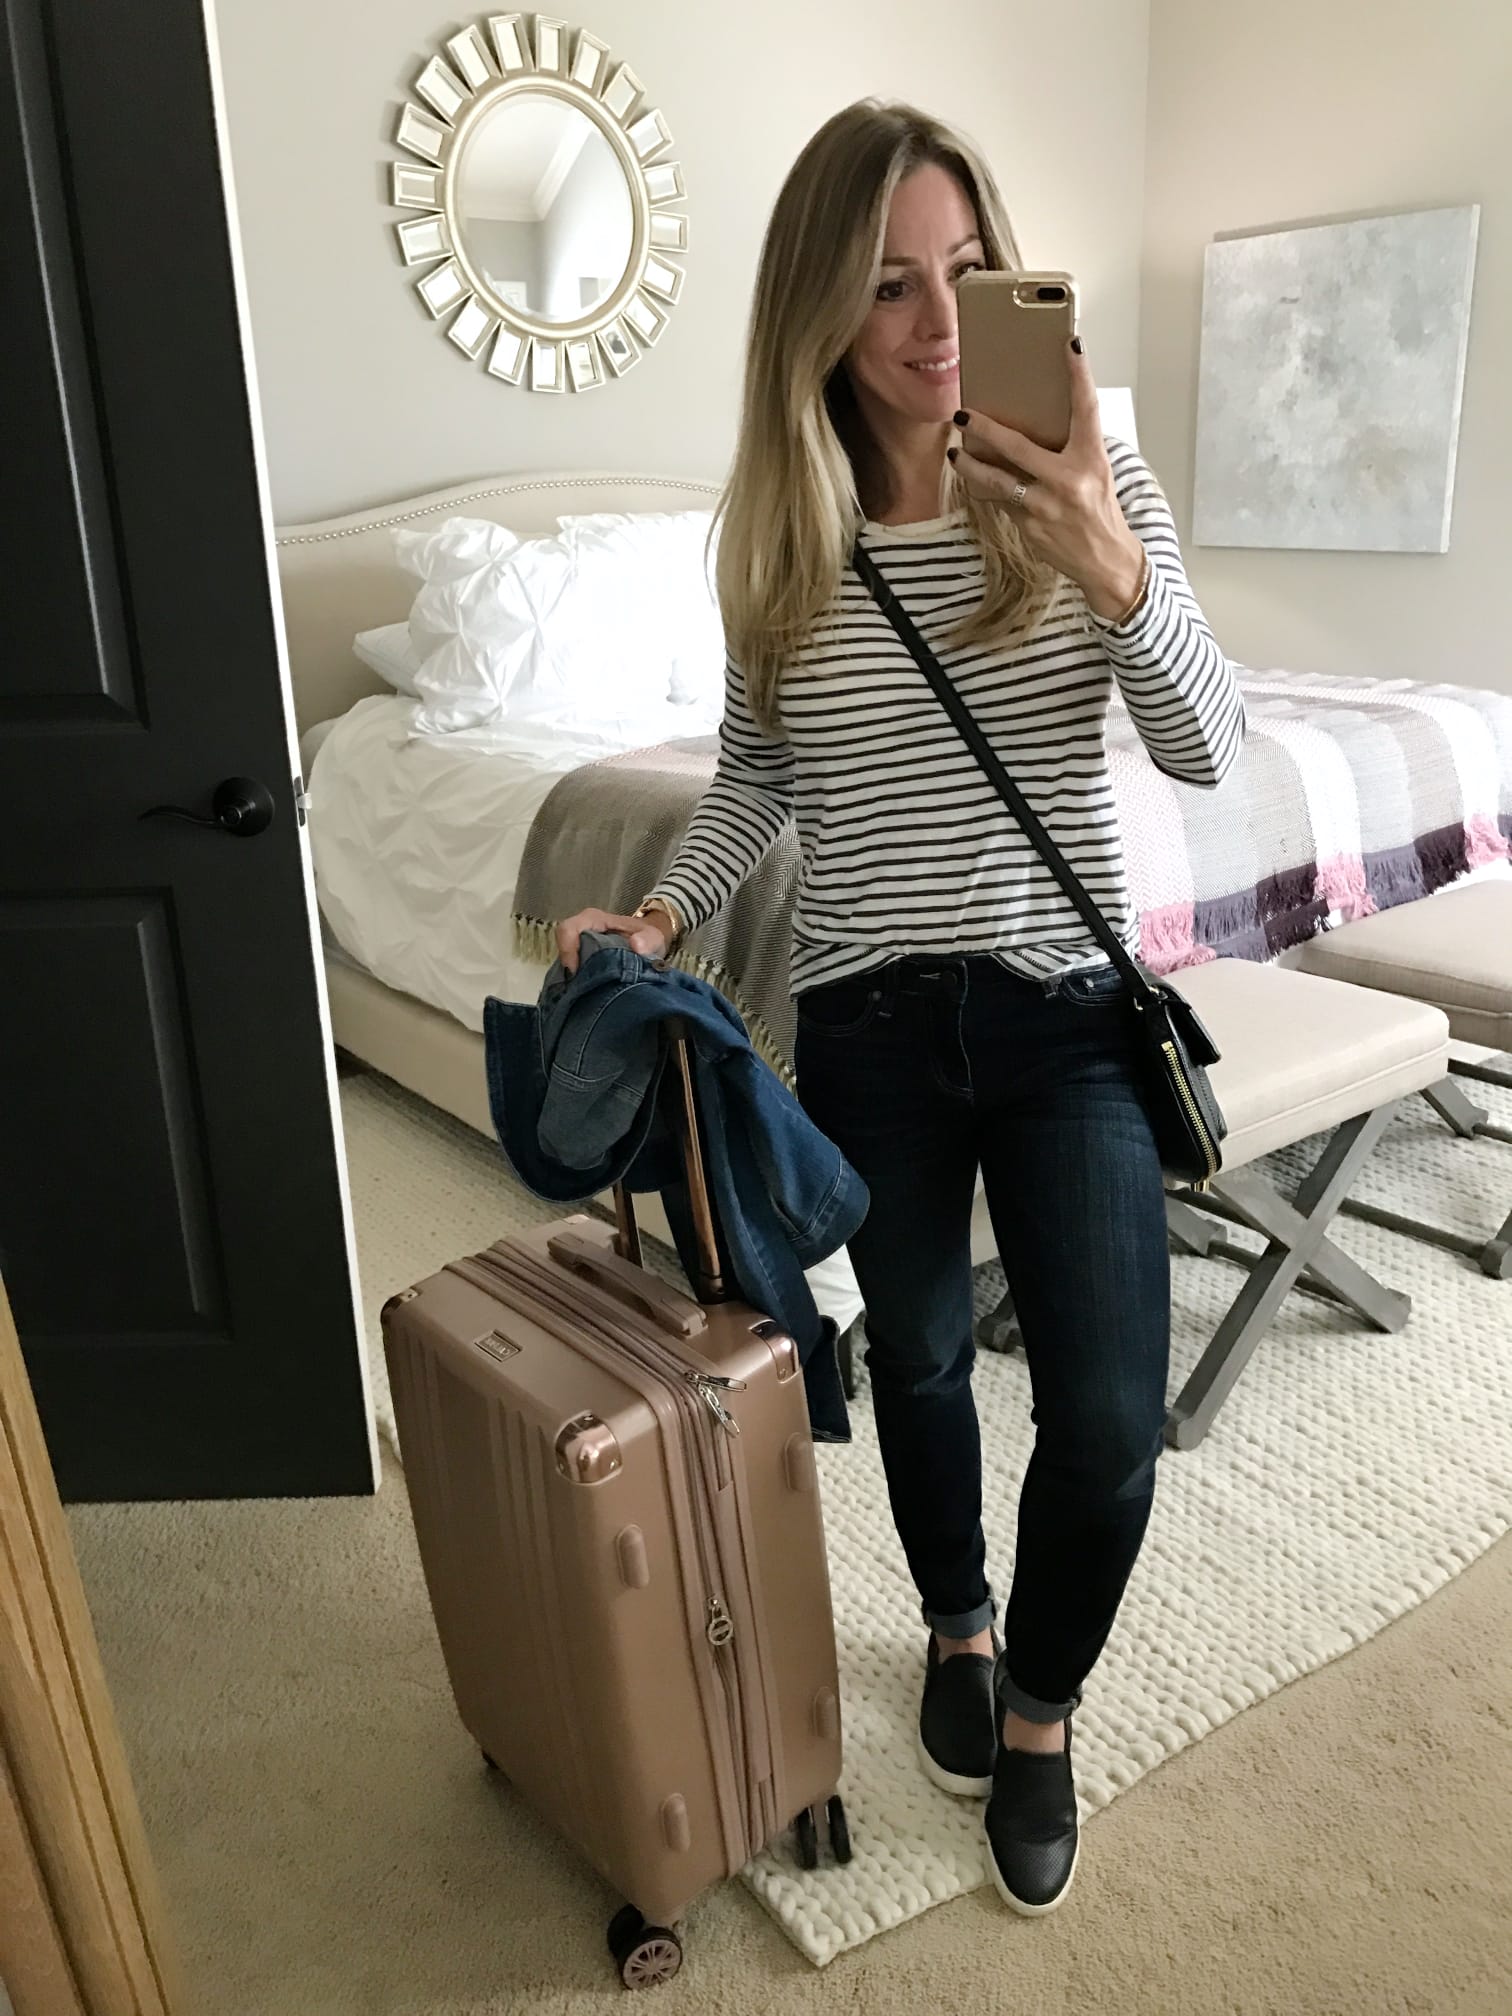 https://eb2pgoq5kpf.exactdn.com/wp-content/uploads/2017/10/Fall-fashion-comfy-travel-outfit-striped-top-jeans-and-slip-on-sneakers-with-rose-gold-luggage.jpg?strip=all&lossy=1&w=2560&ssl=1